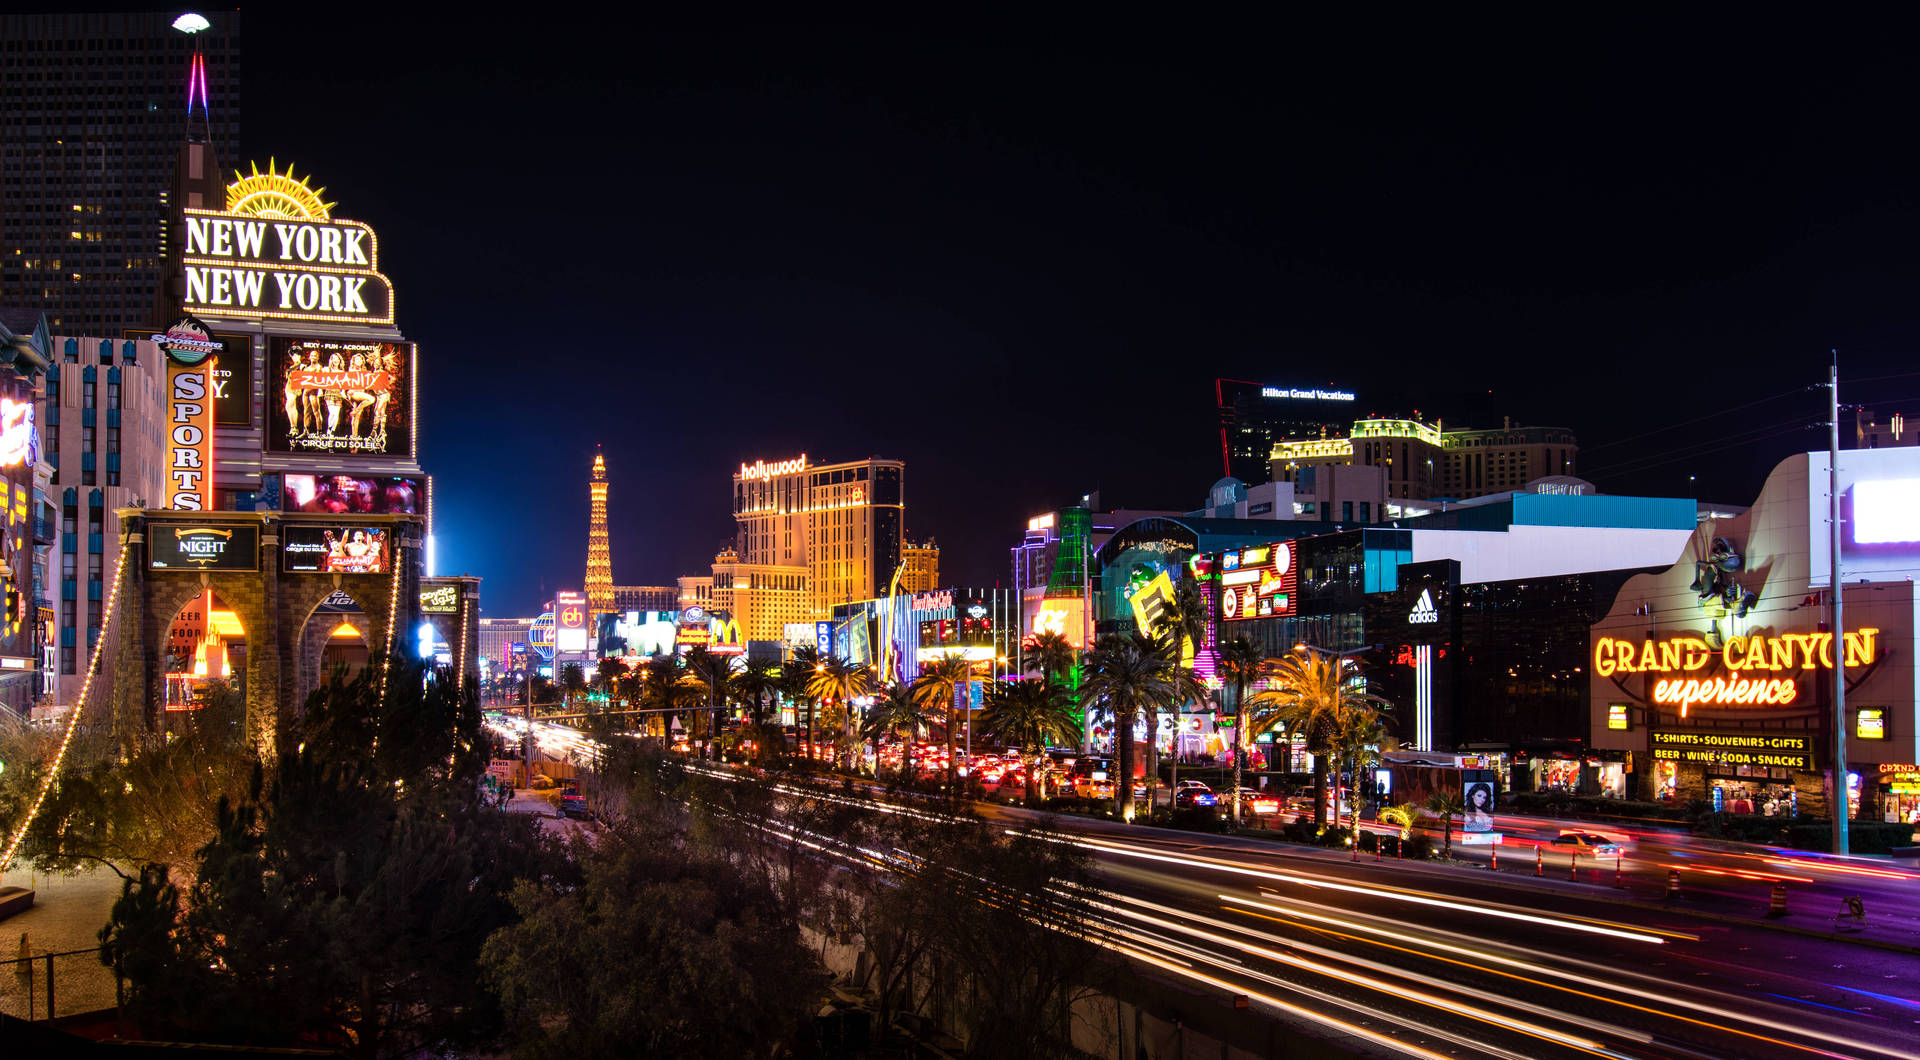 A night view of the Las Vegas Strip brings excitement and wonder. Wallpaper